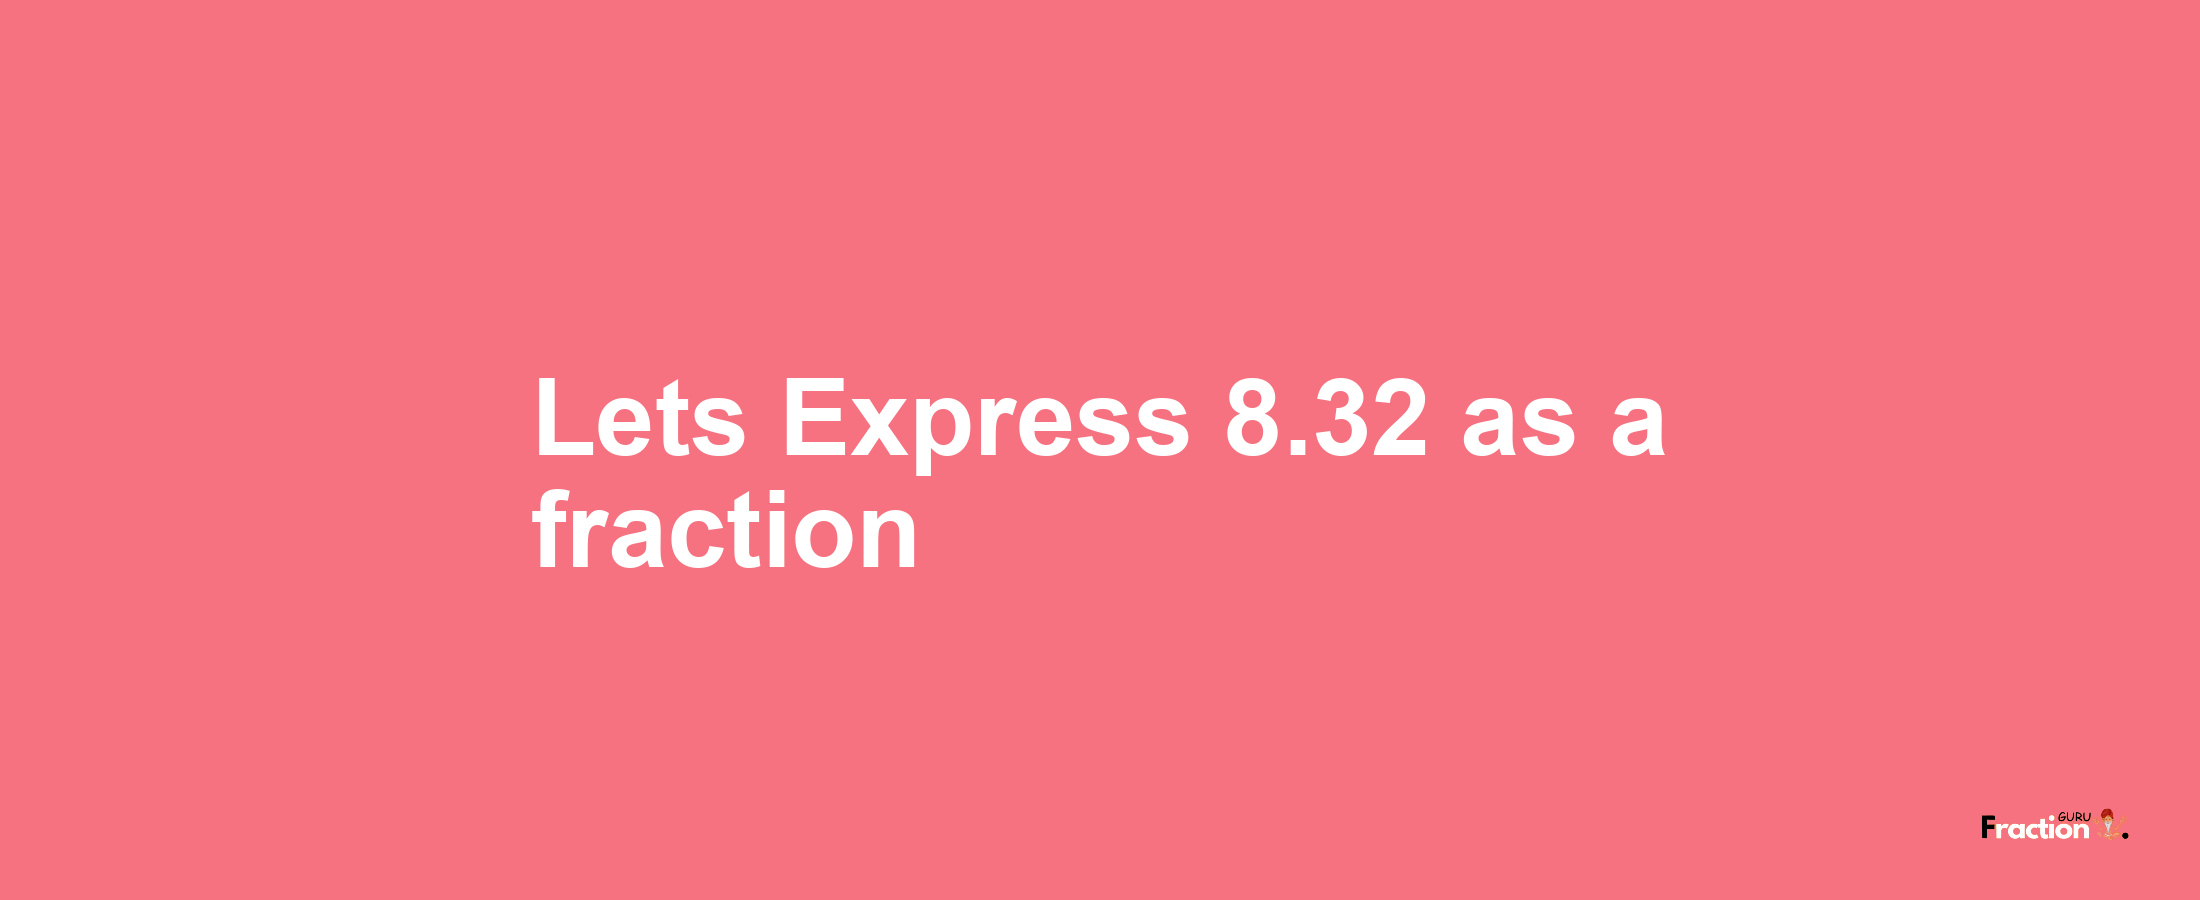 Lets Express 8.32 as afraction